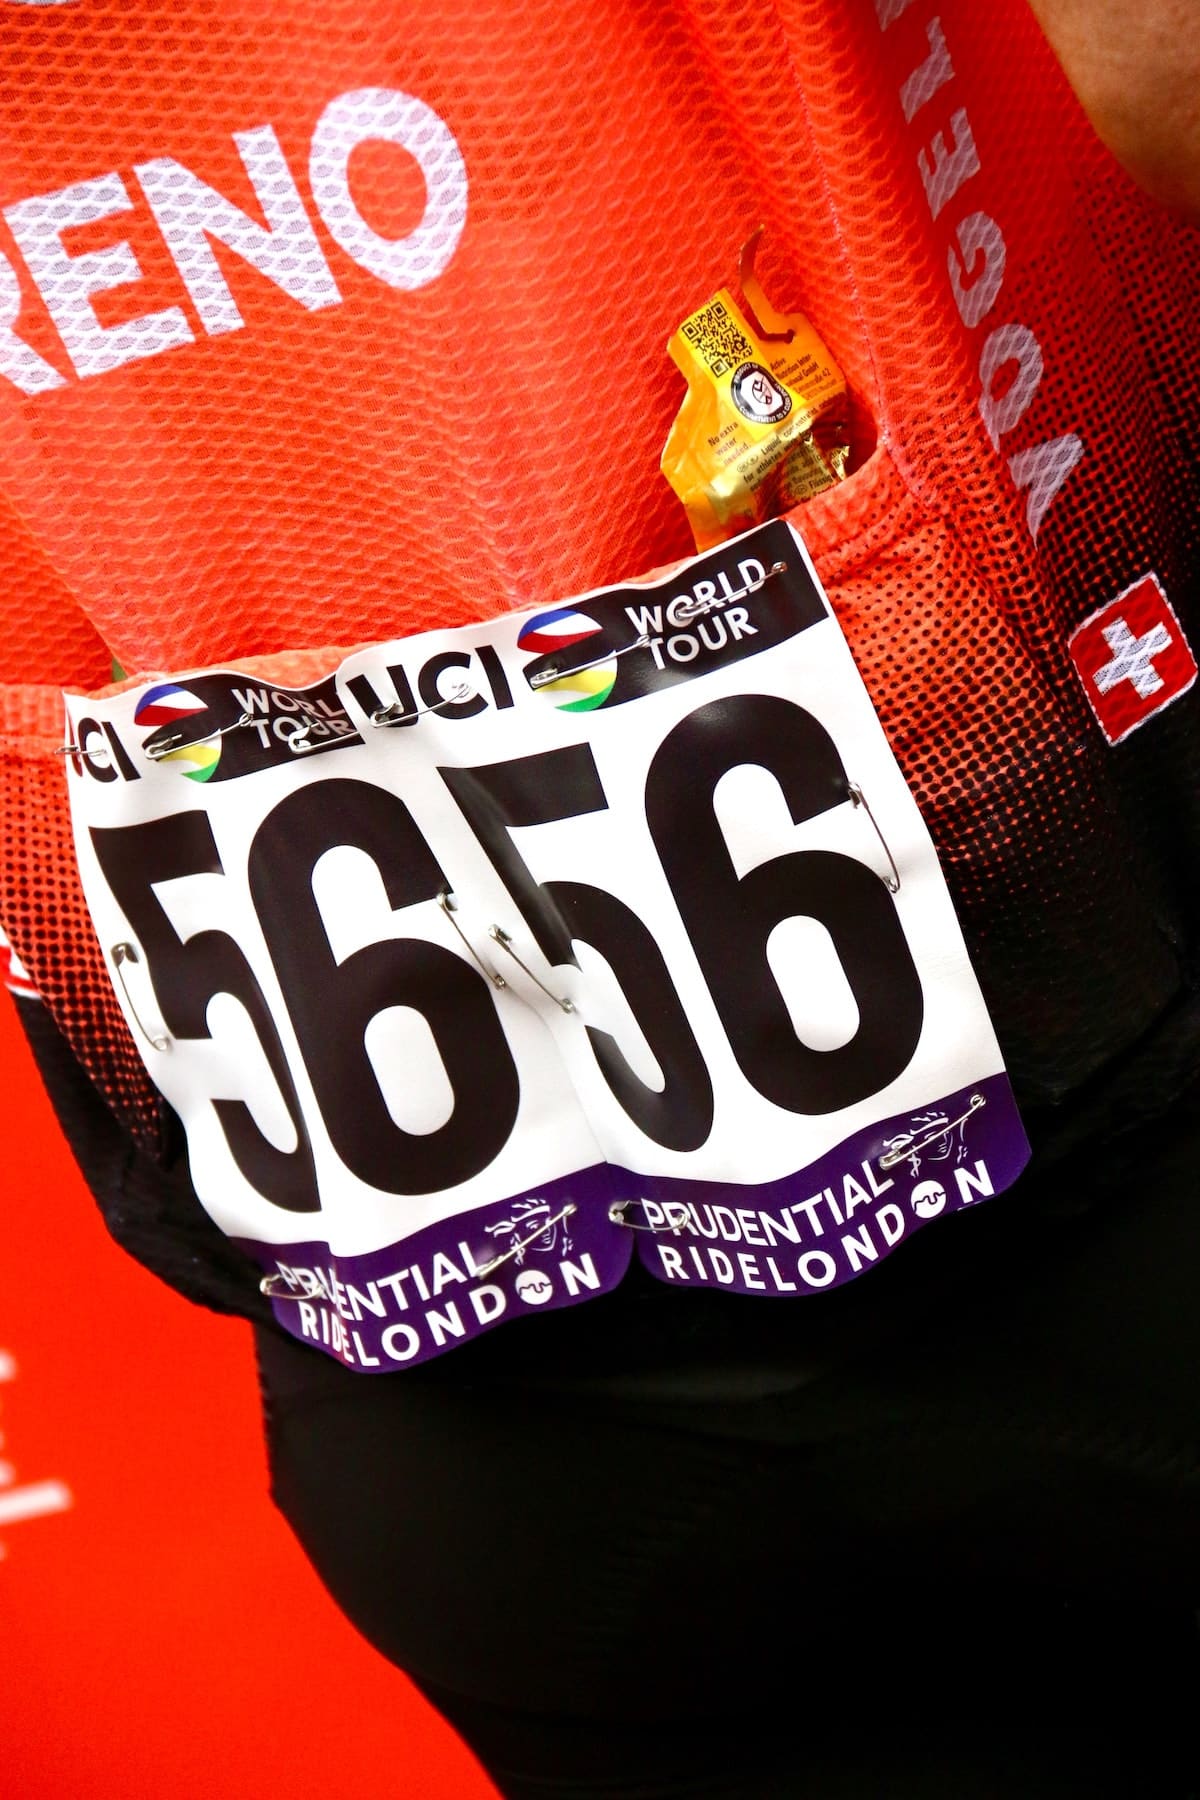 A energy gel in the back of a red cycling jersey - an example of on-ride nutrition for cycling.